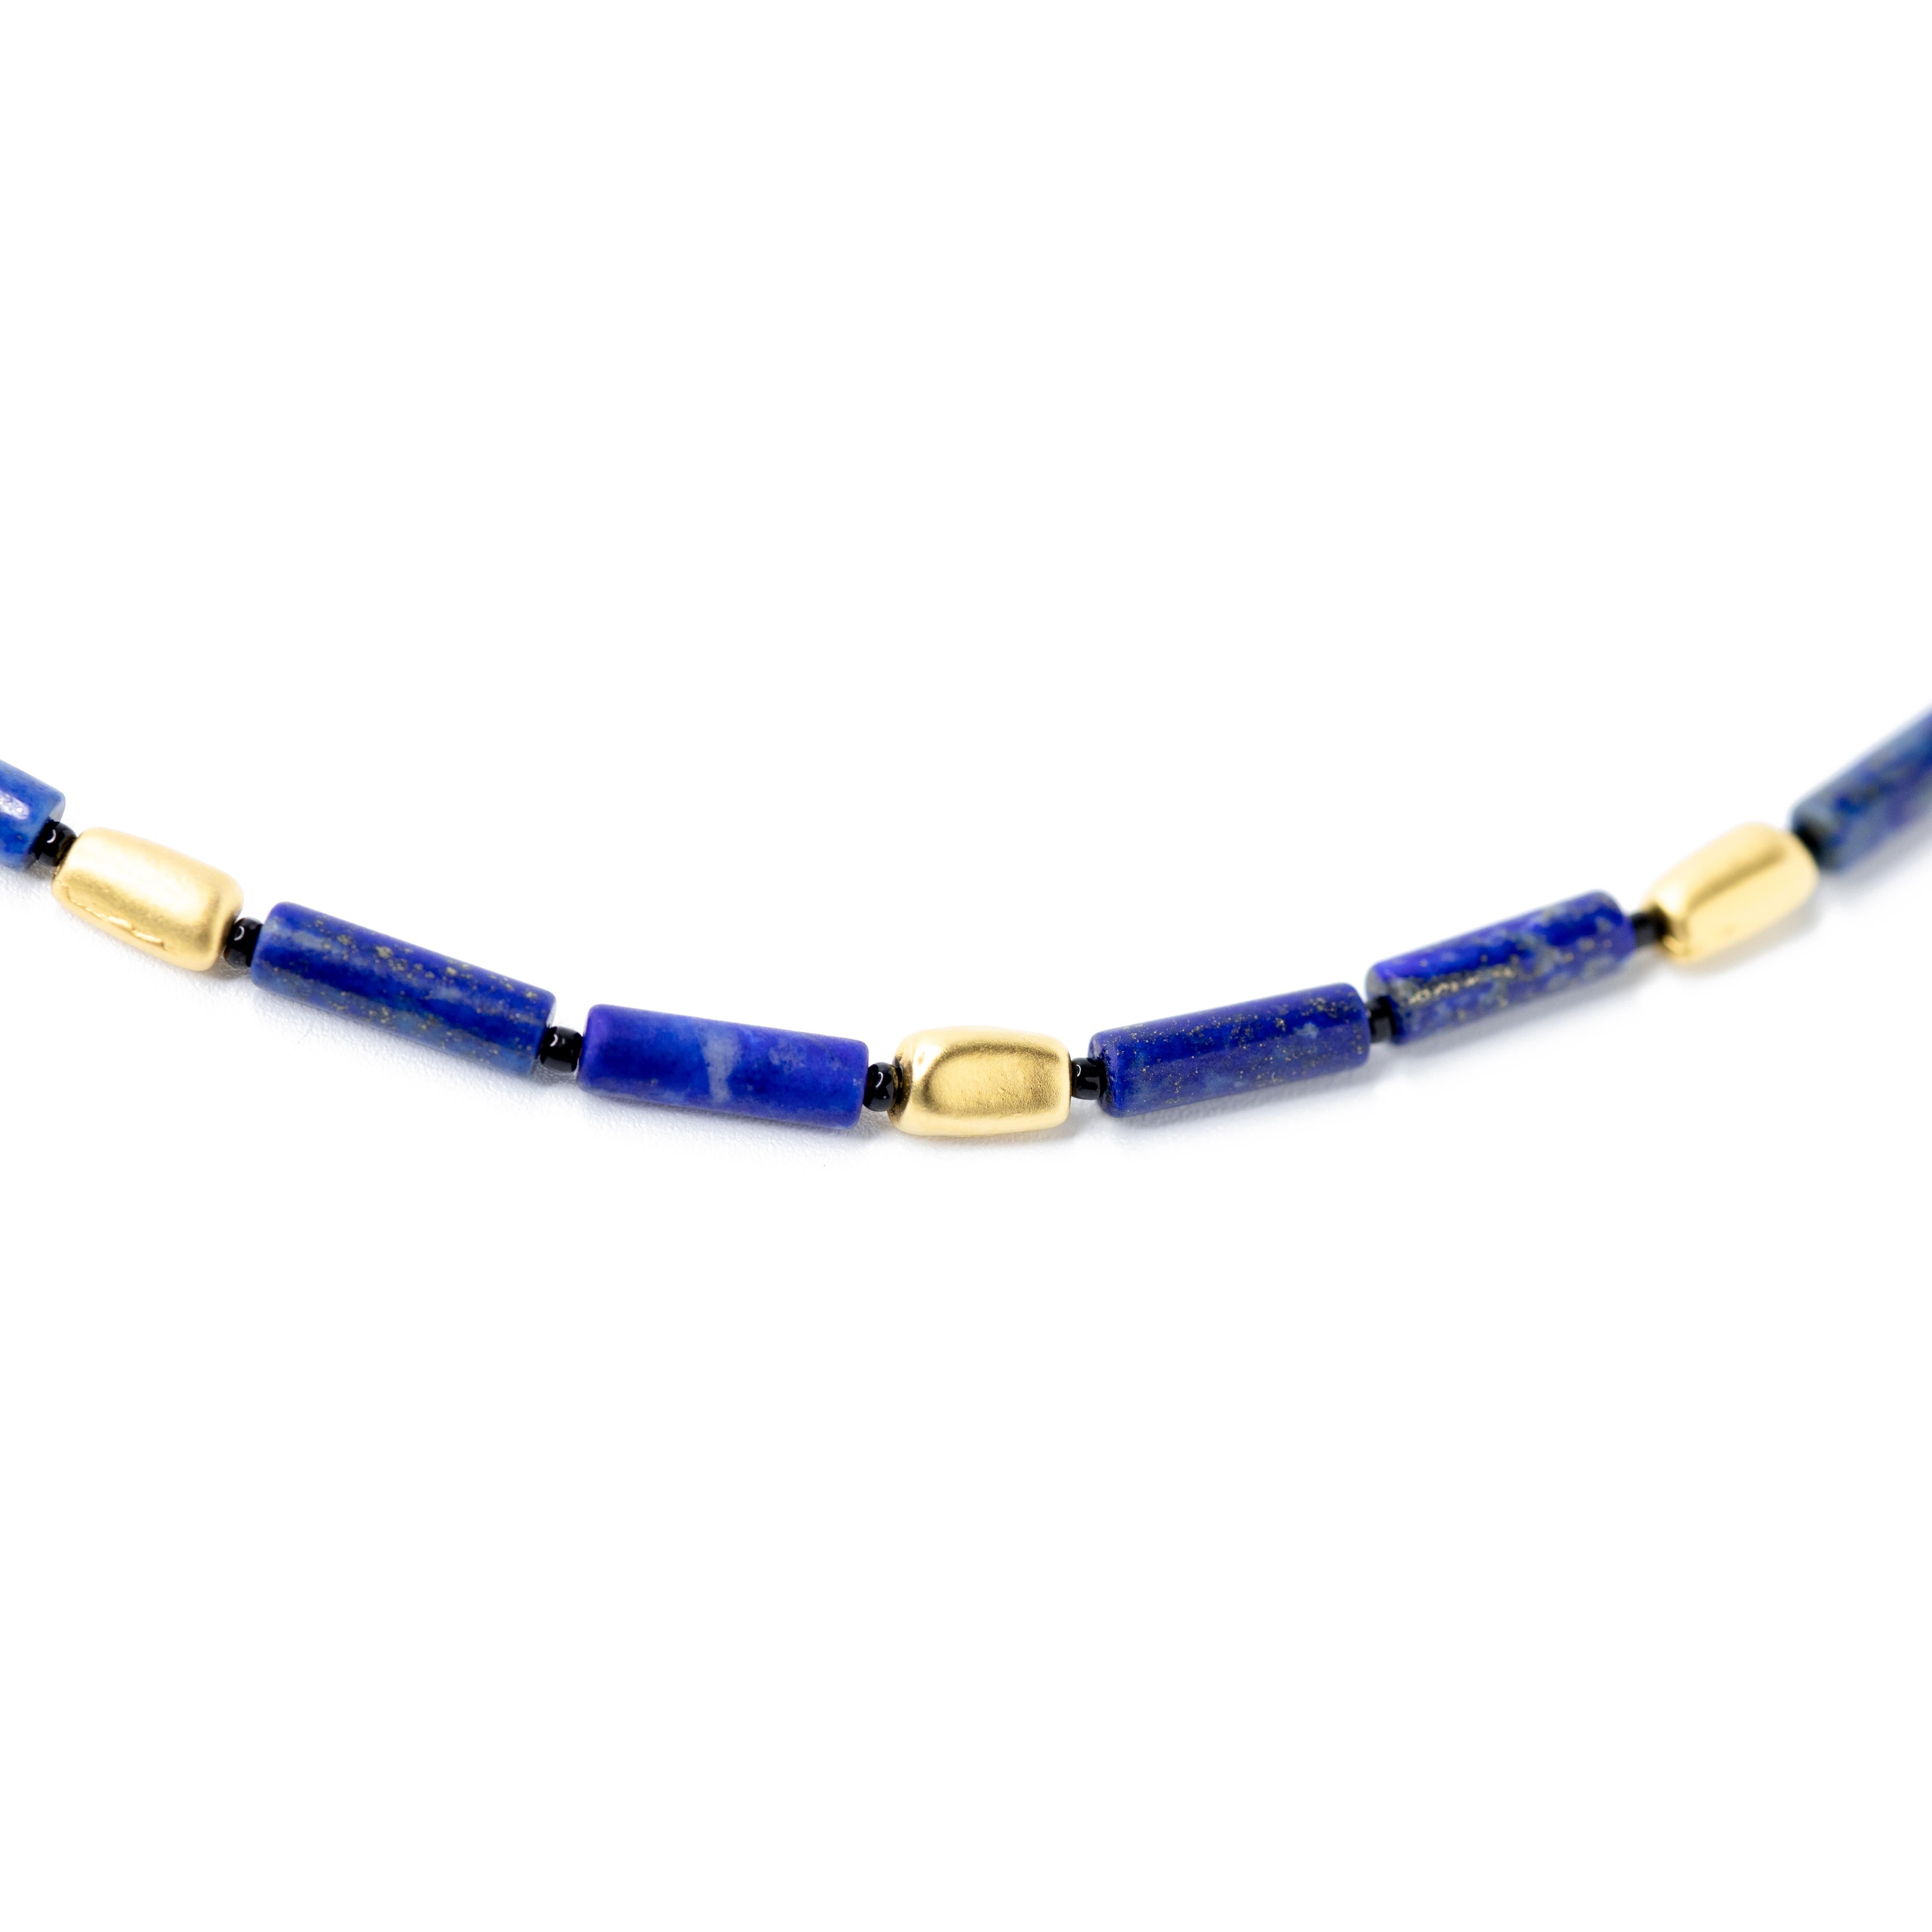 This necklace is crafted from Lapis Lazuli Beads and Gold Plated Brass Beads, inspired by Salvador Dali's Famous Painting 